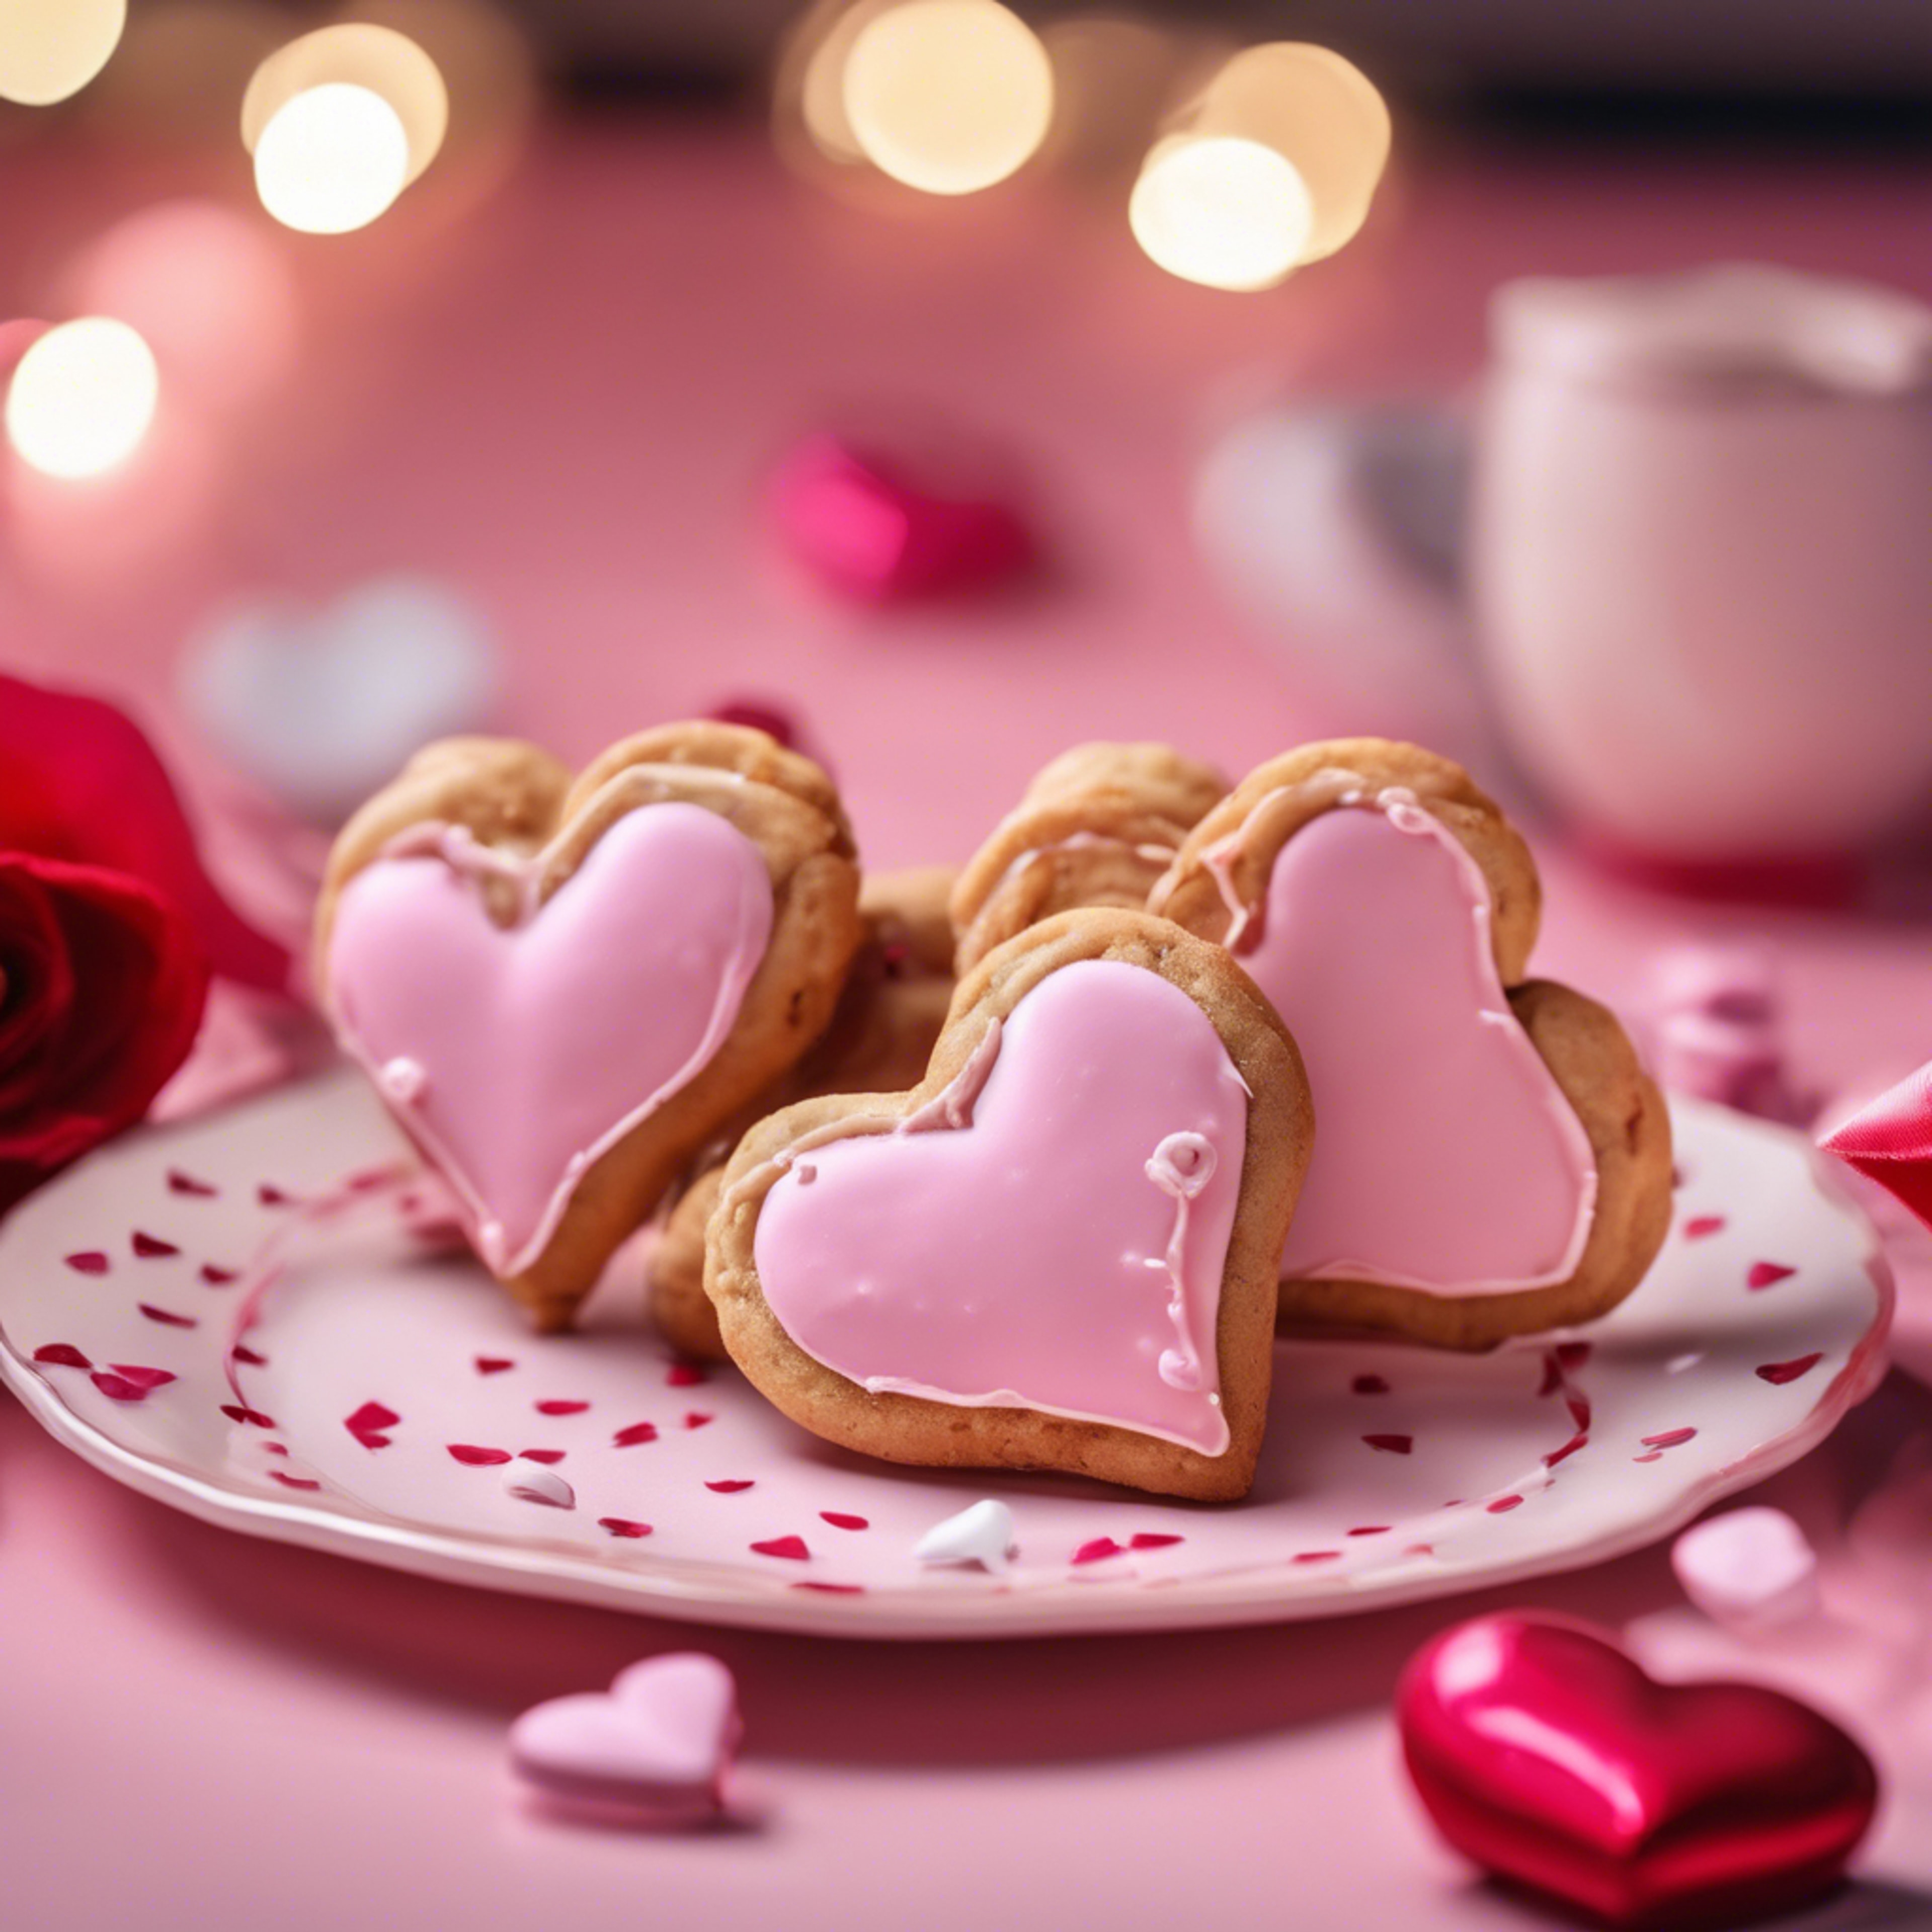 A pair of heart-shaped frosted cookies on a vibrant Valentine's day setting. duvar kağıdı[699c1bd667c44183af85]